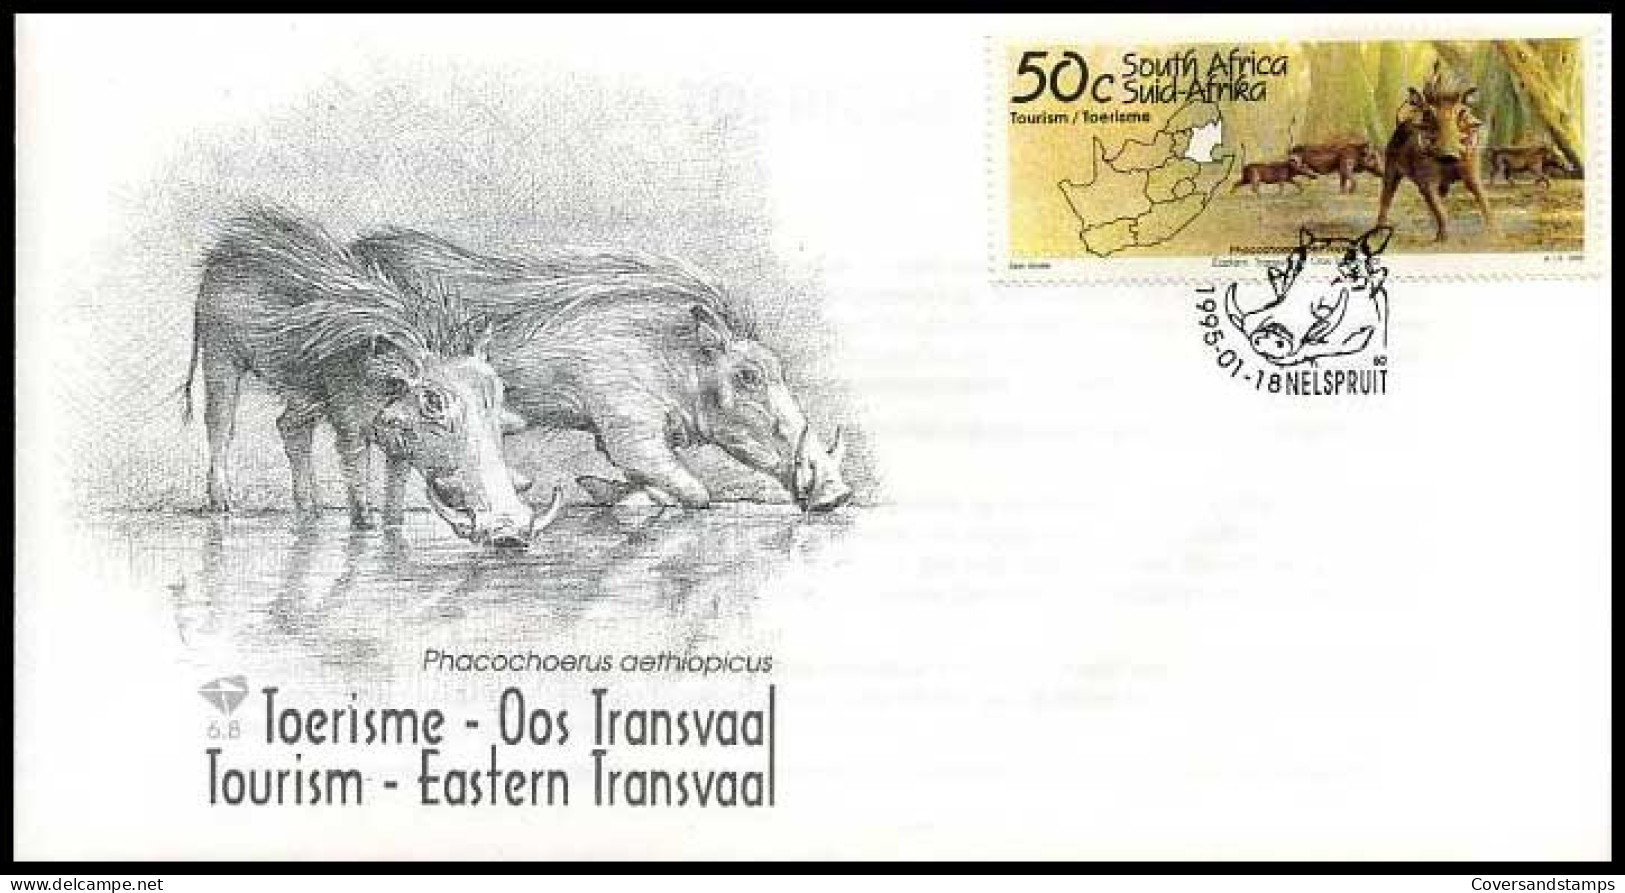 Zuid-Afrika - FDC -    Tourism - Eastern Transvaal                           - FDC